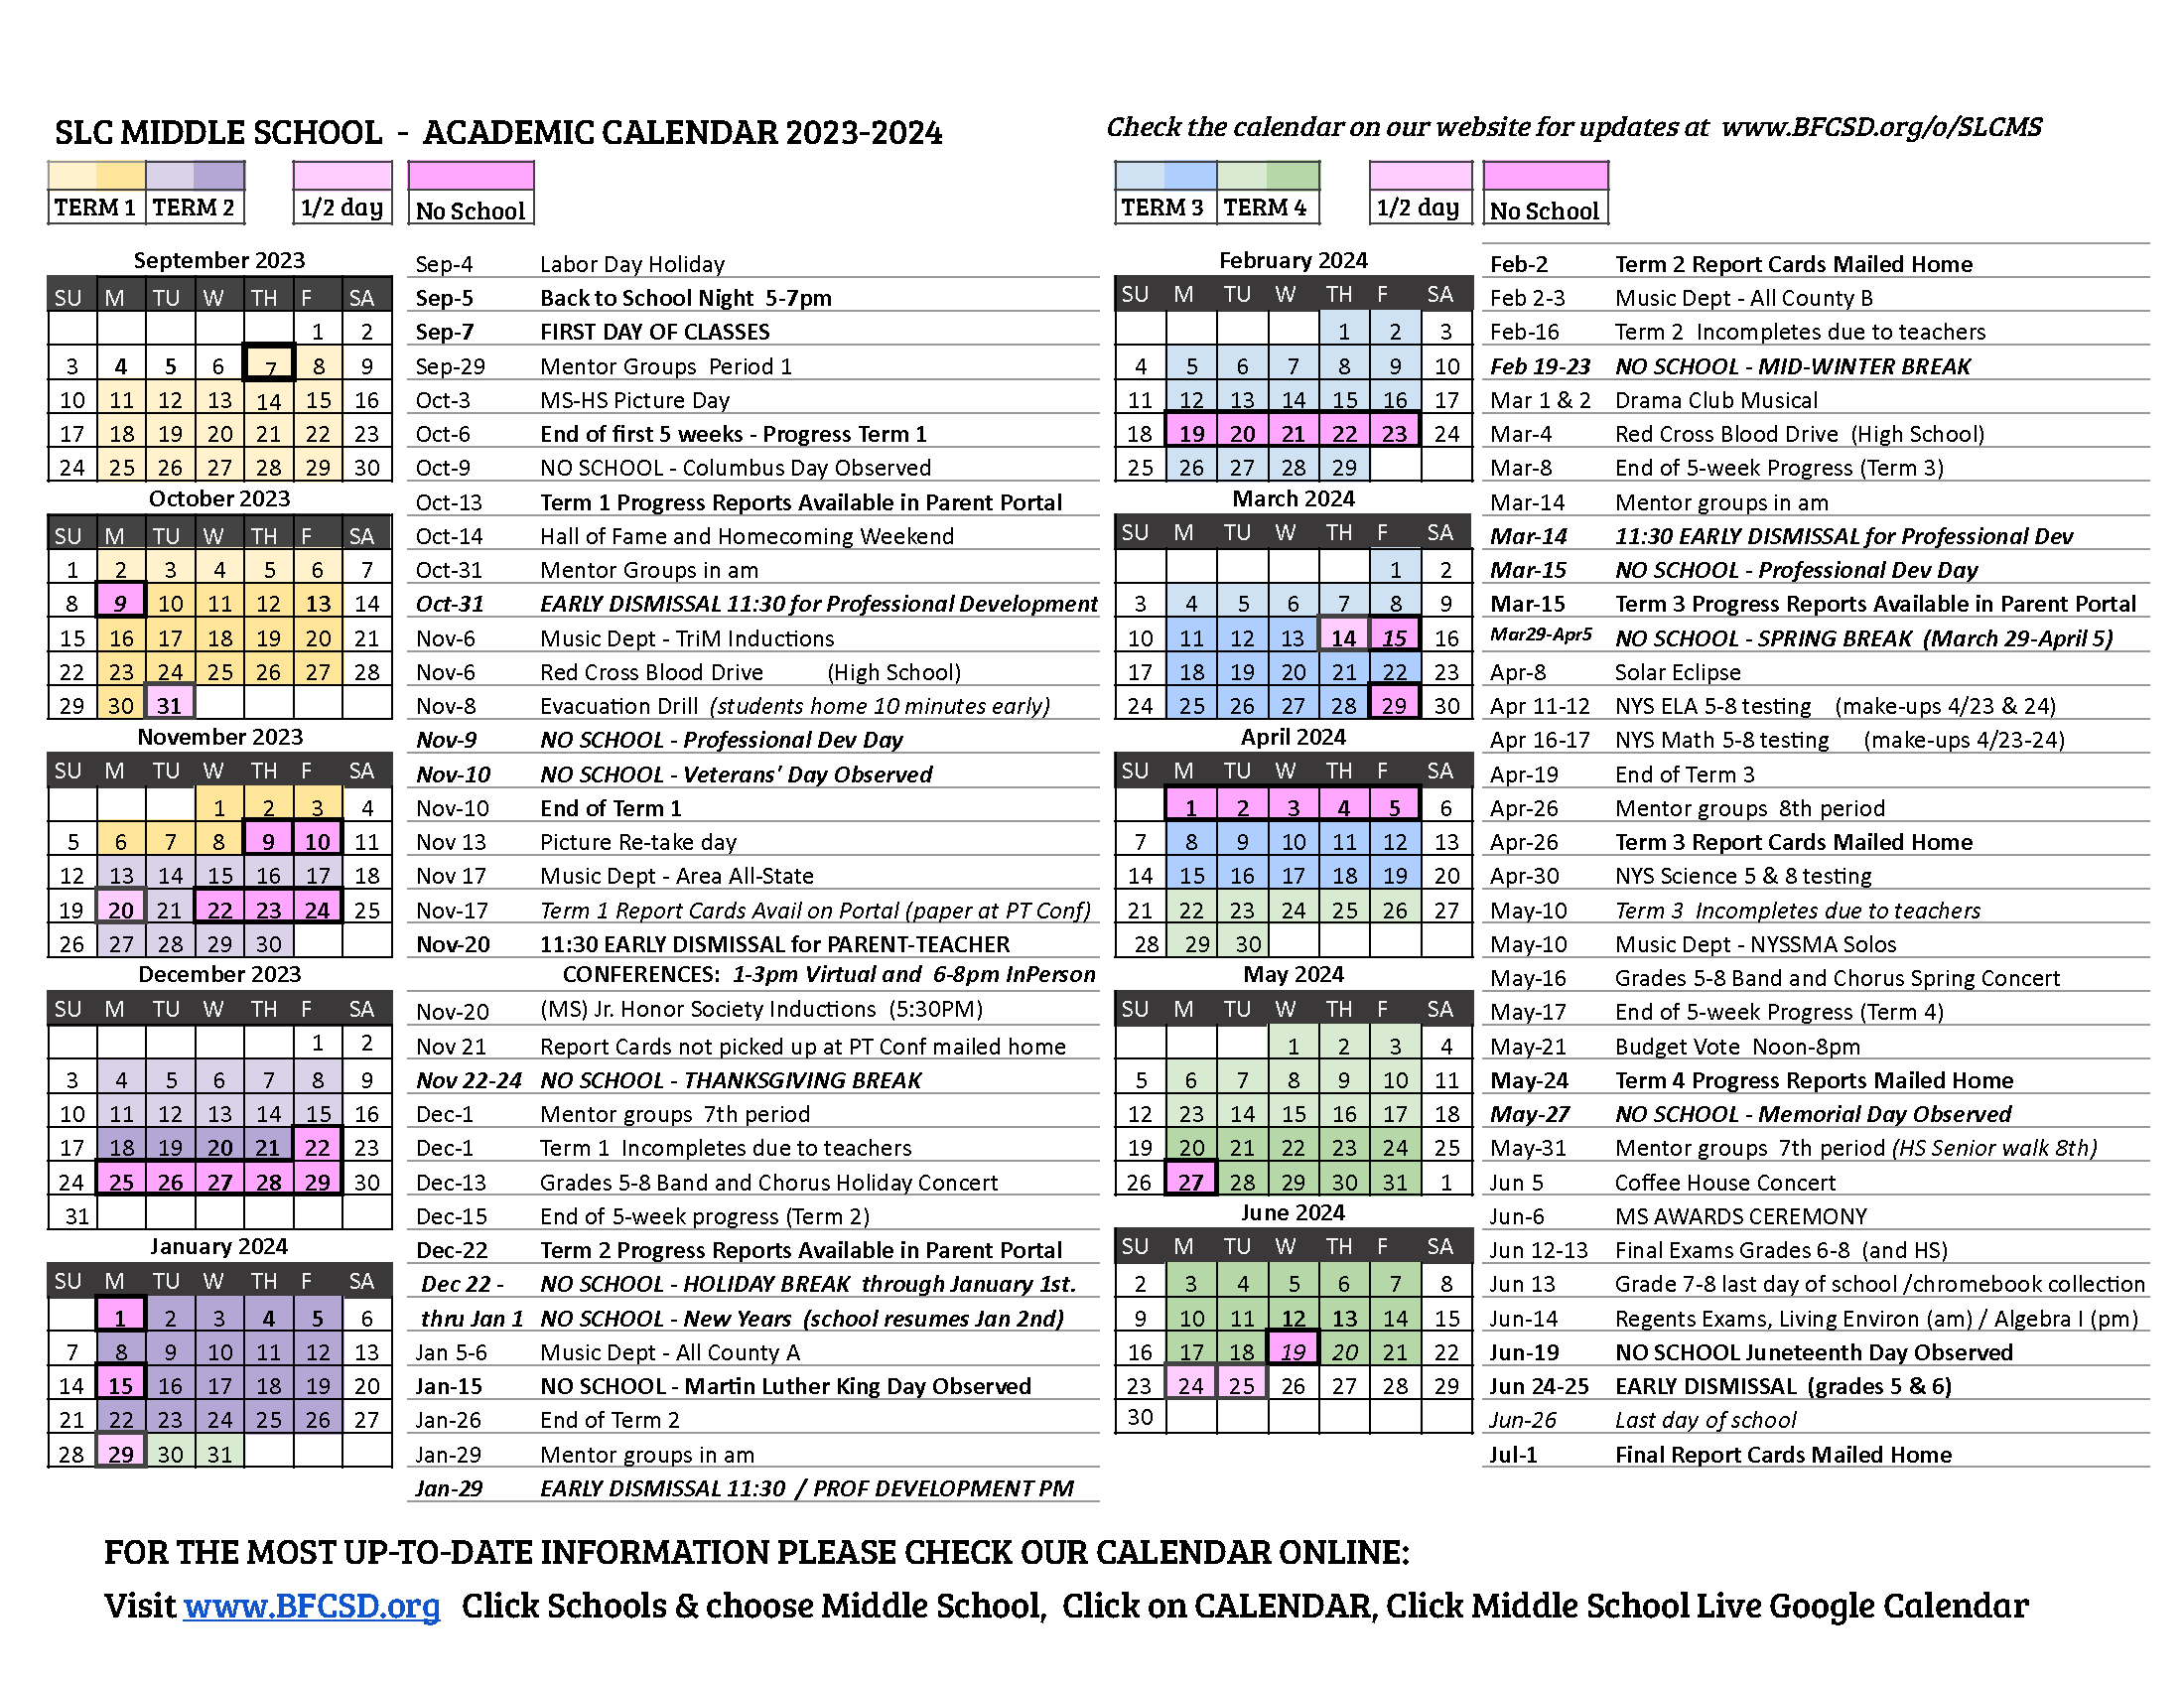 MS Academic Calendar 2022-23.  More information can be at https://www.bfcsd.org/o/slcms/page/middle-school-calendar